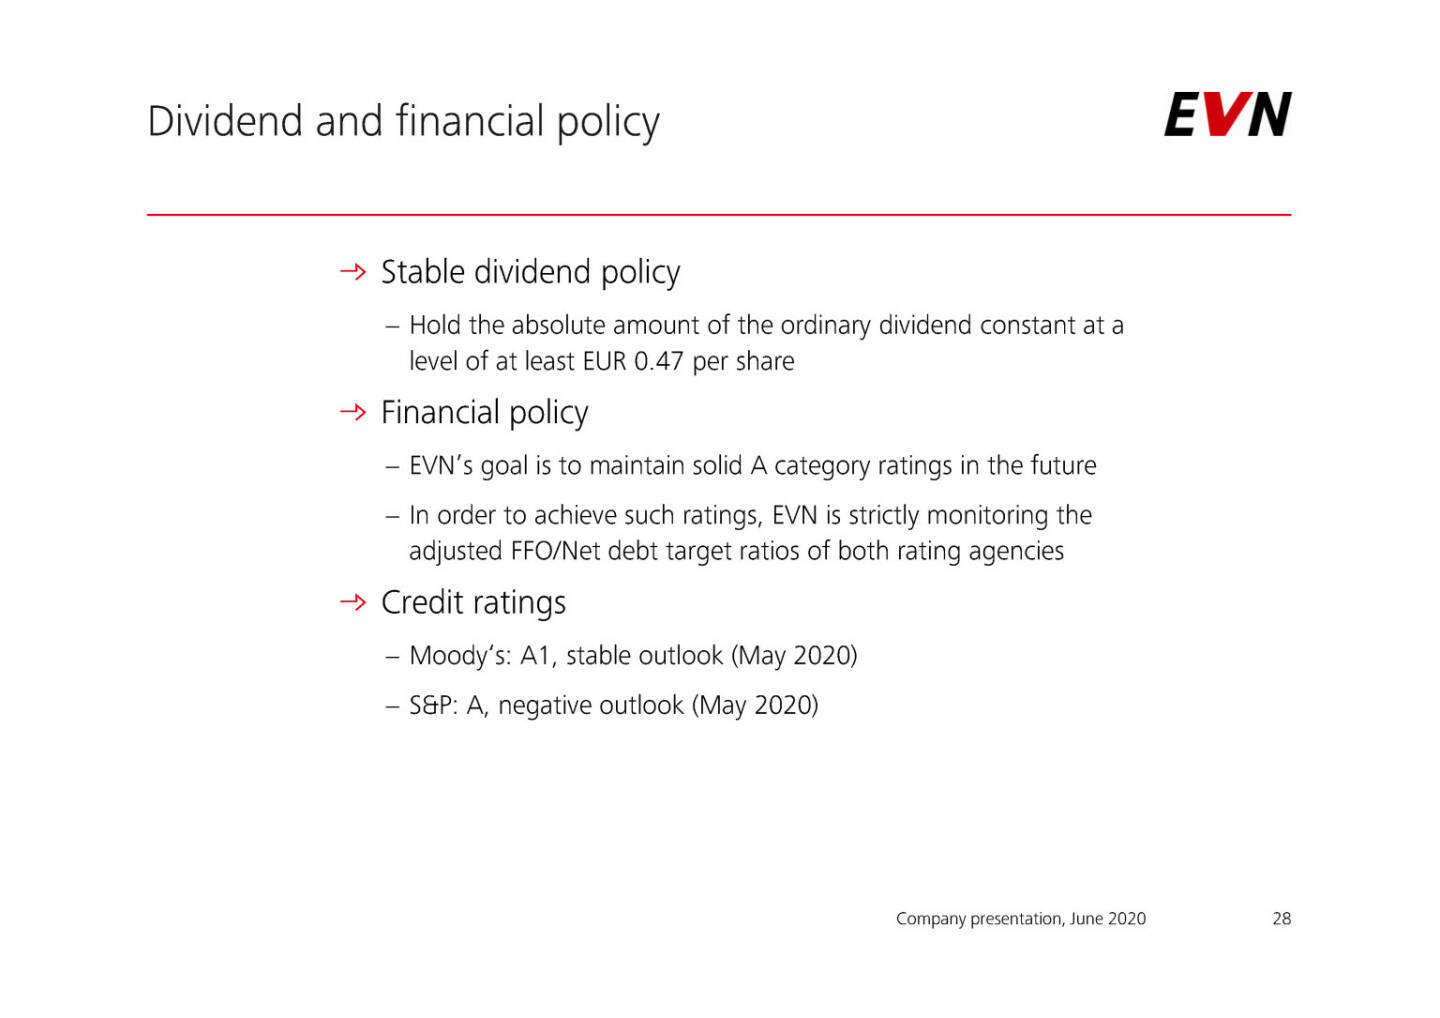 EVN - Dividend and financial policy